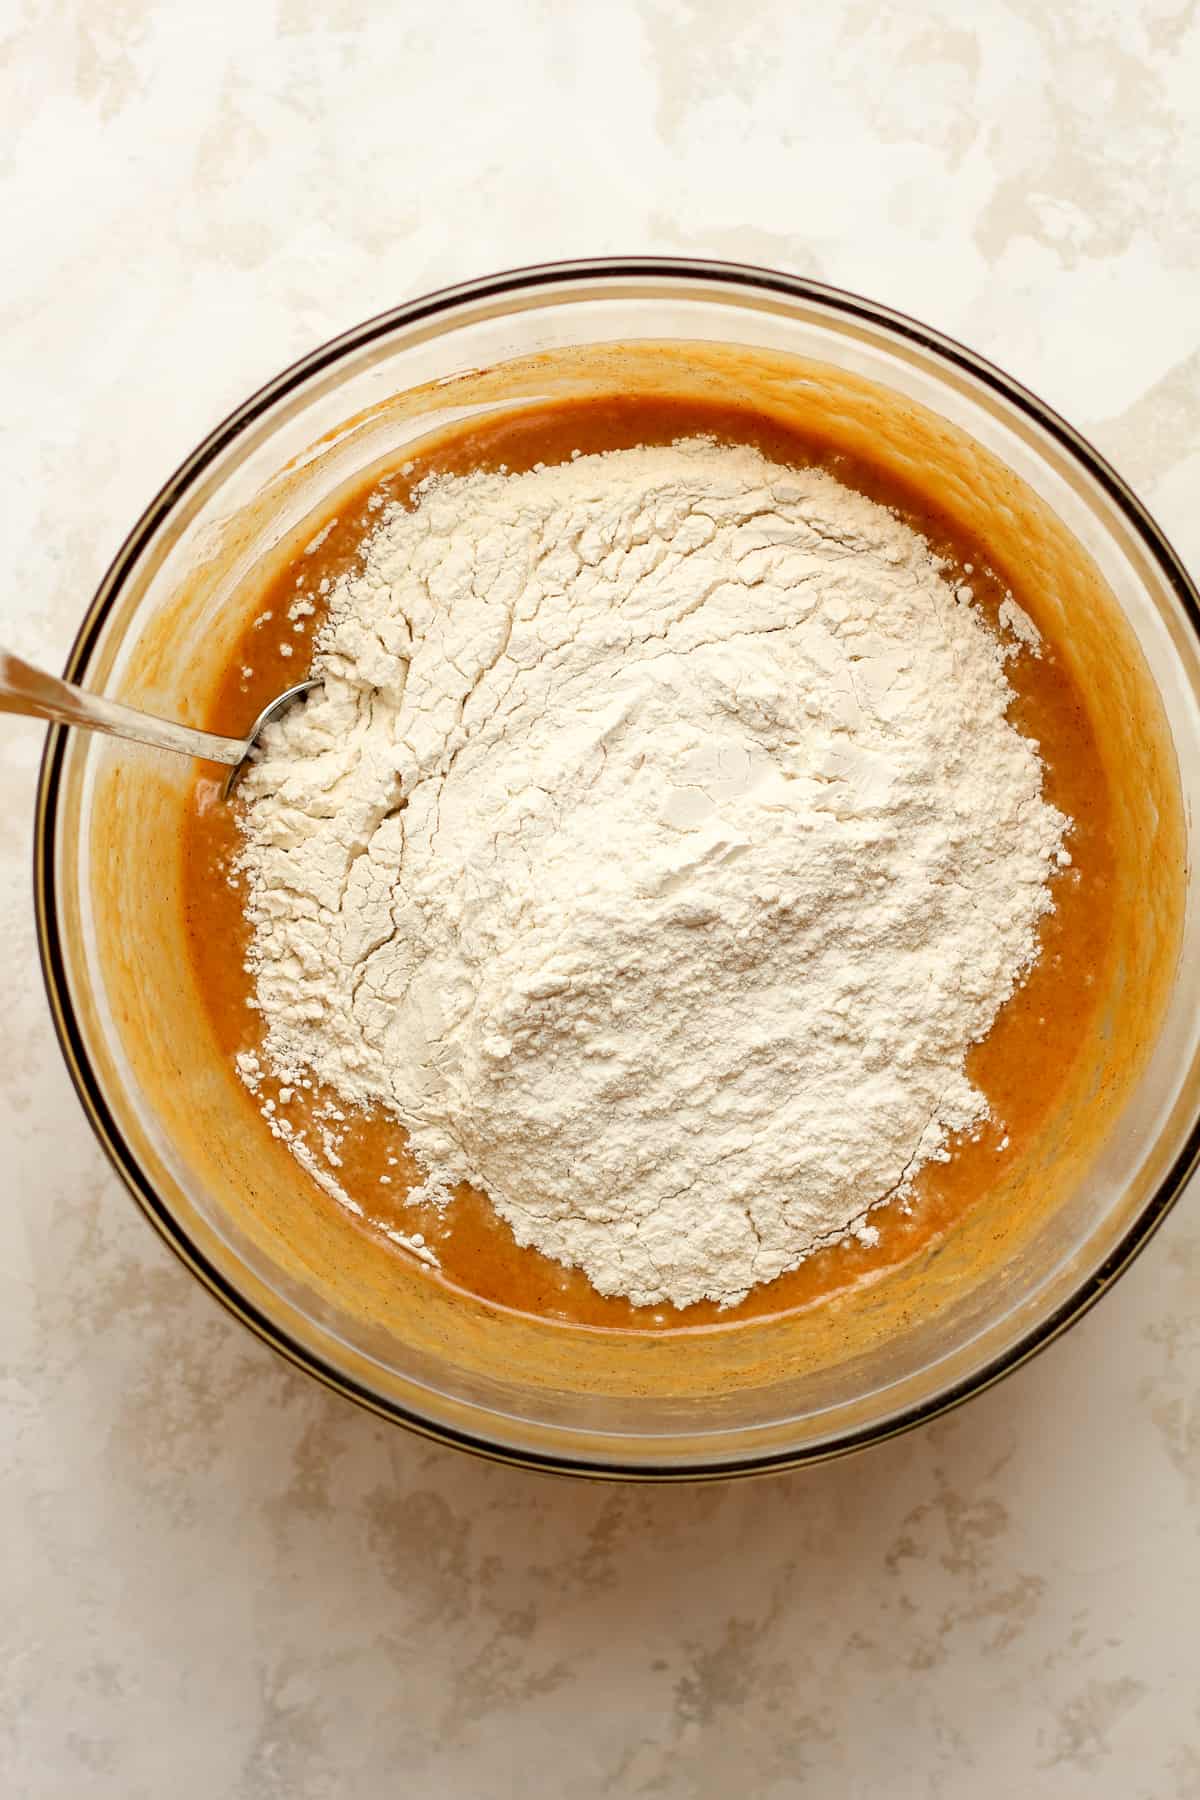 A bowl of the pumpkin batter with flour on top.